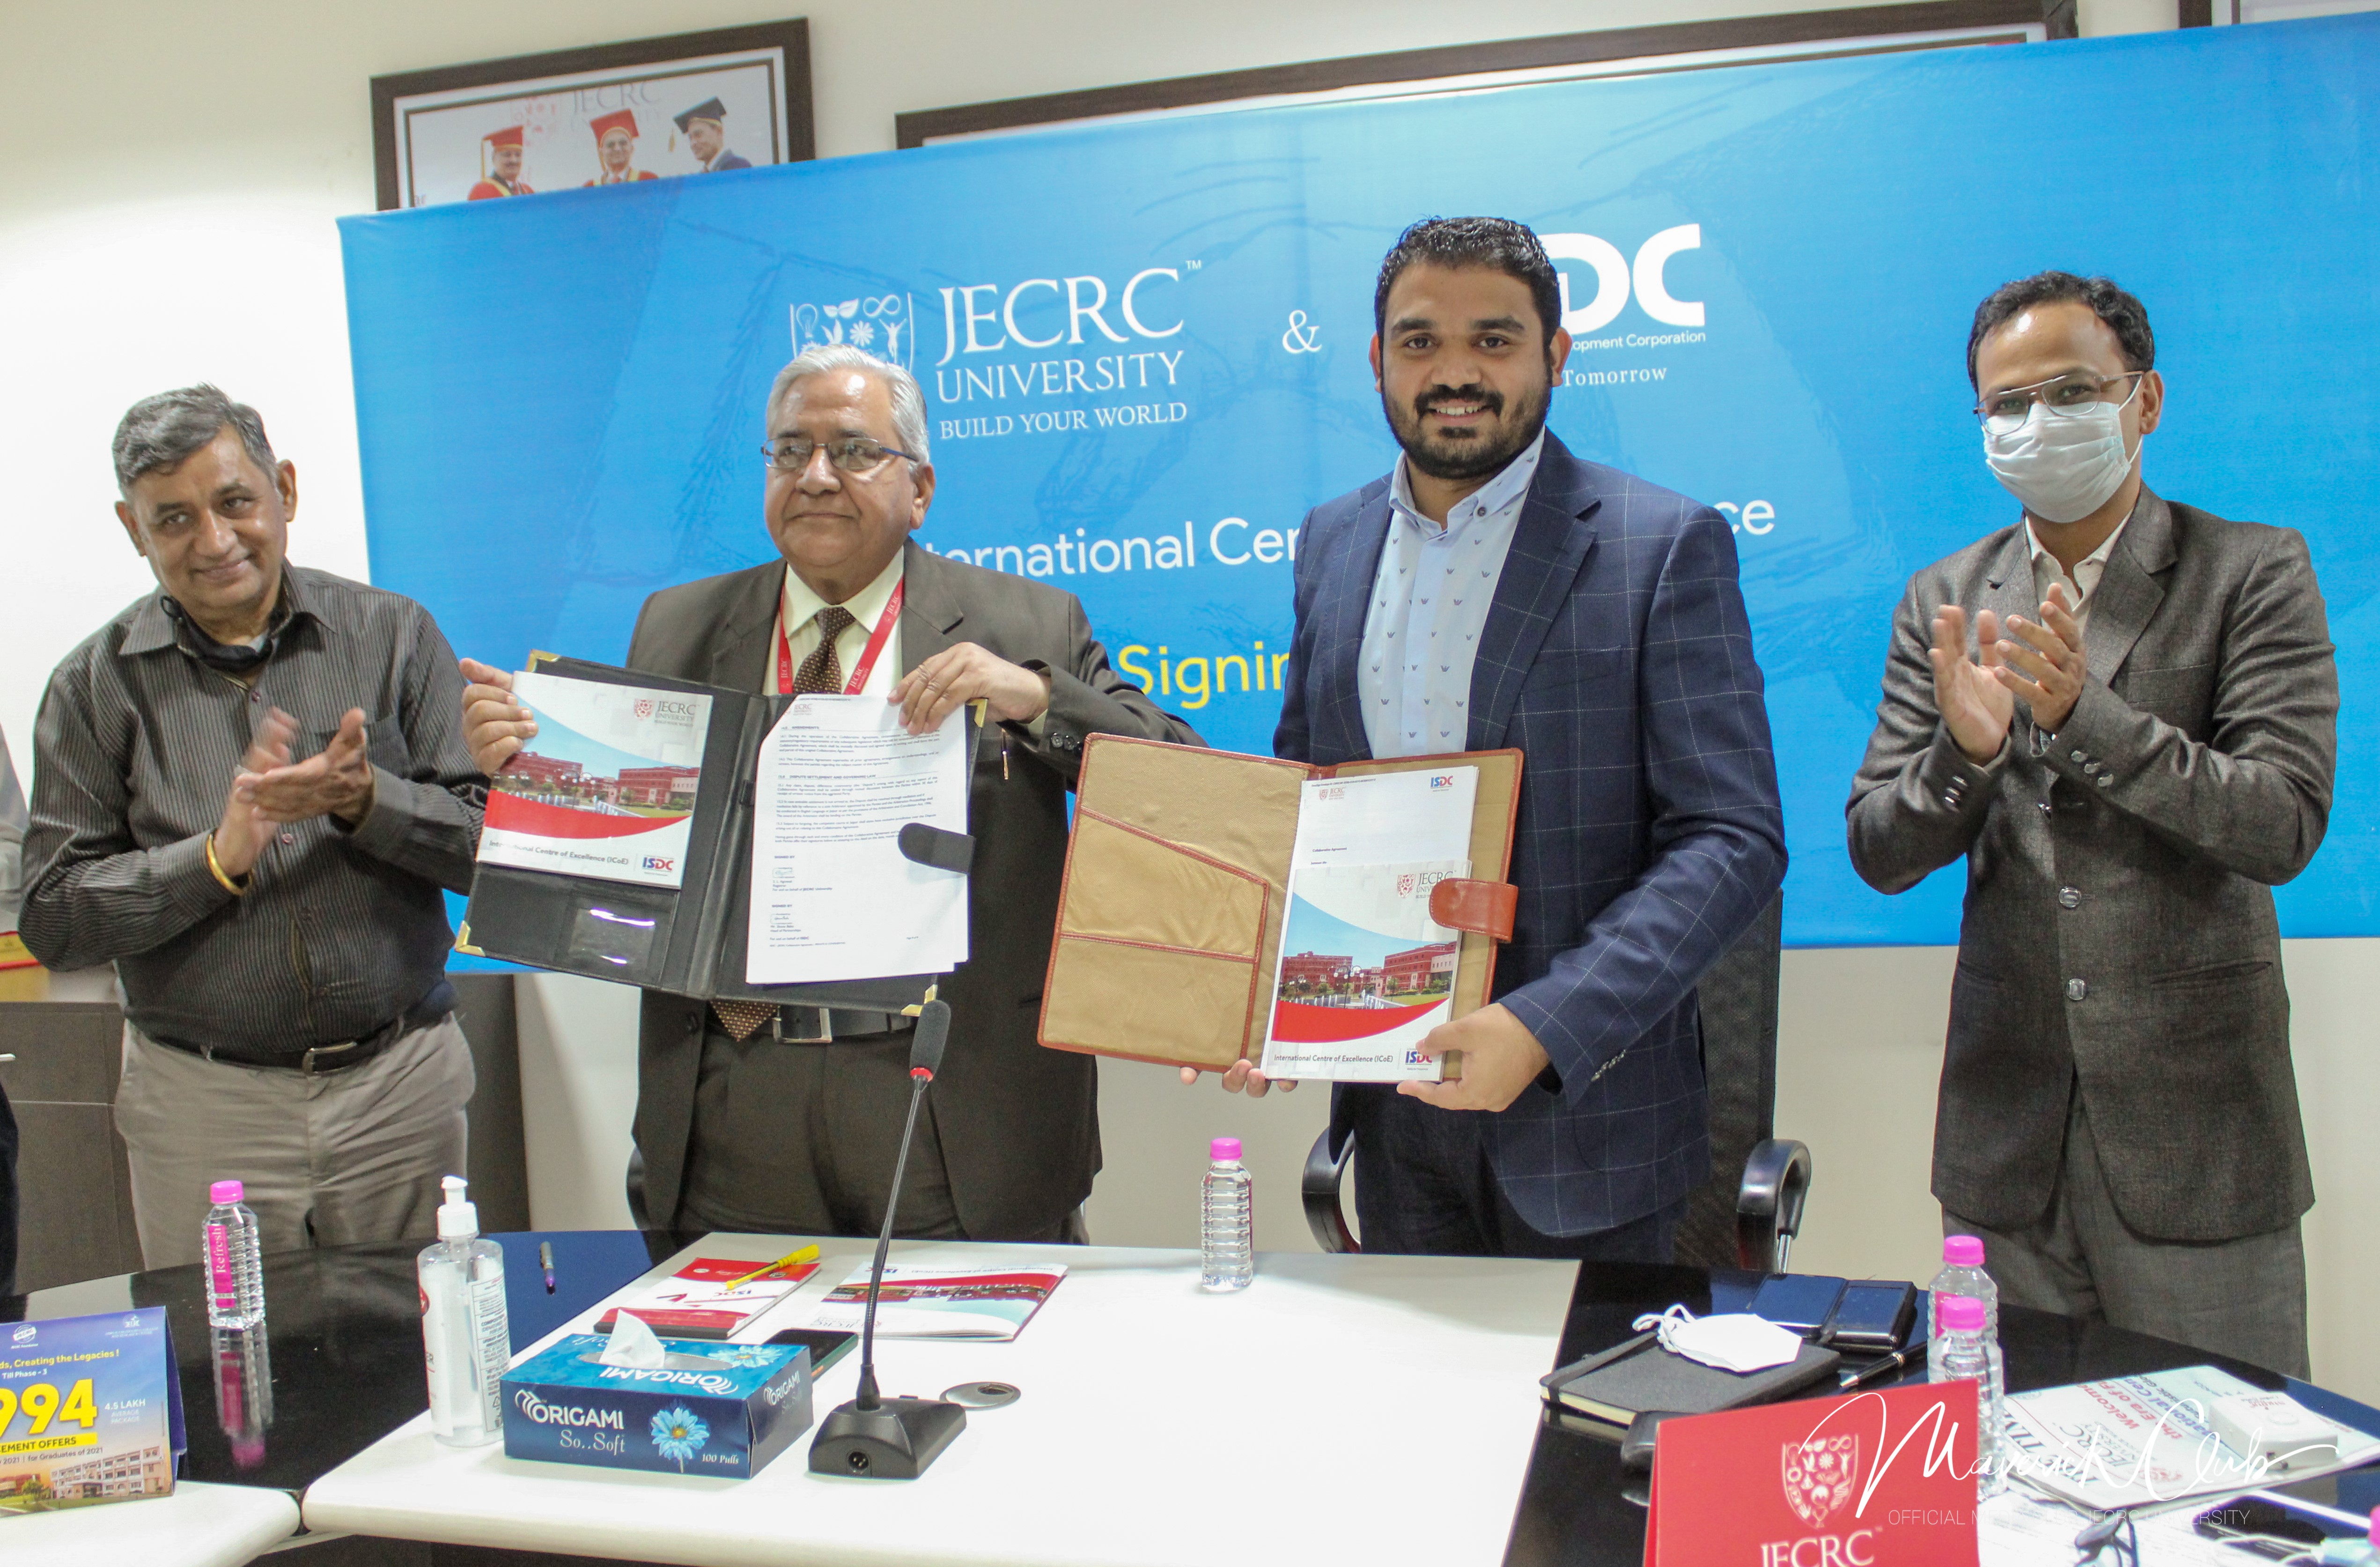 isdc-ties-up-with-jecrc-university-for-international-centre-of-excellence